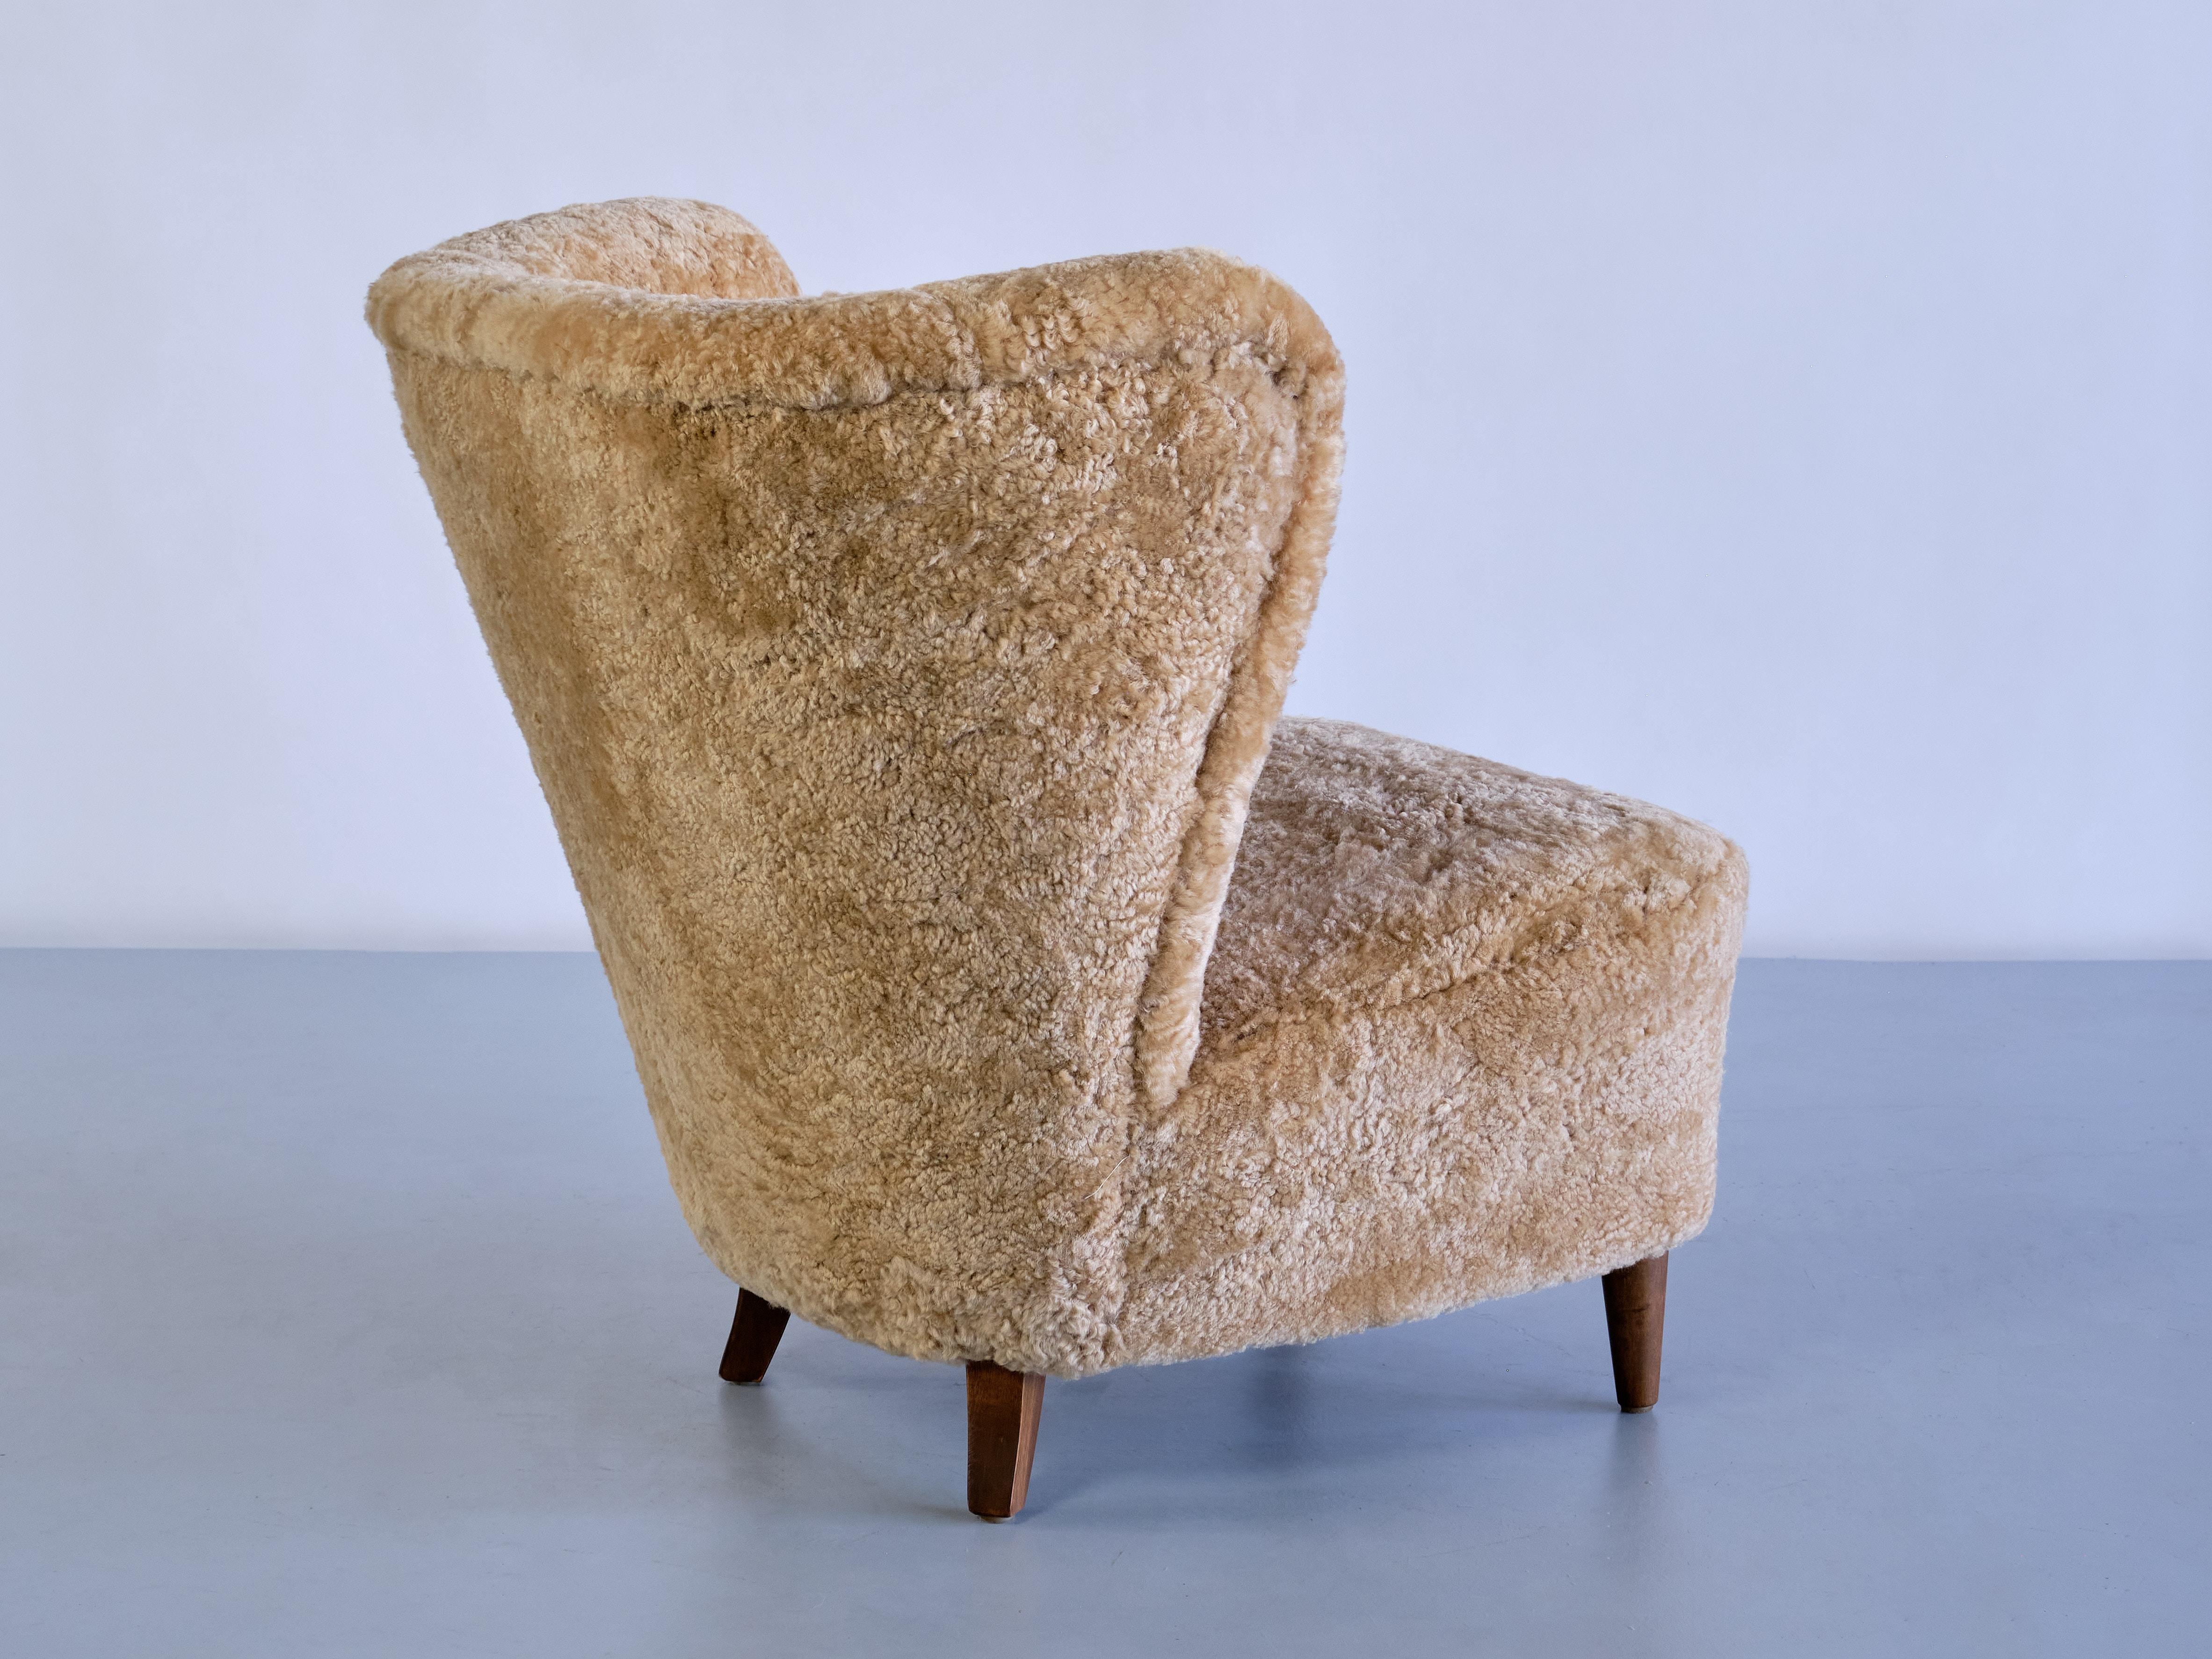 Pair of Johannes Brynte Lounge Chairs in Sheepskin and Ash Wood, Sweden, 1940s For Sale 4